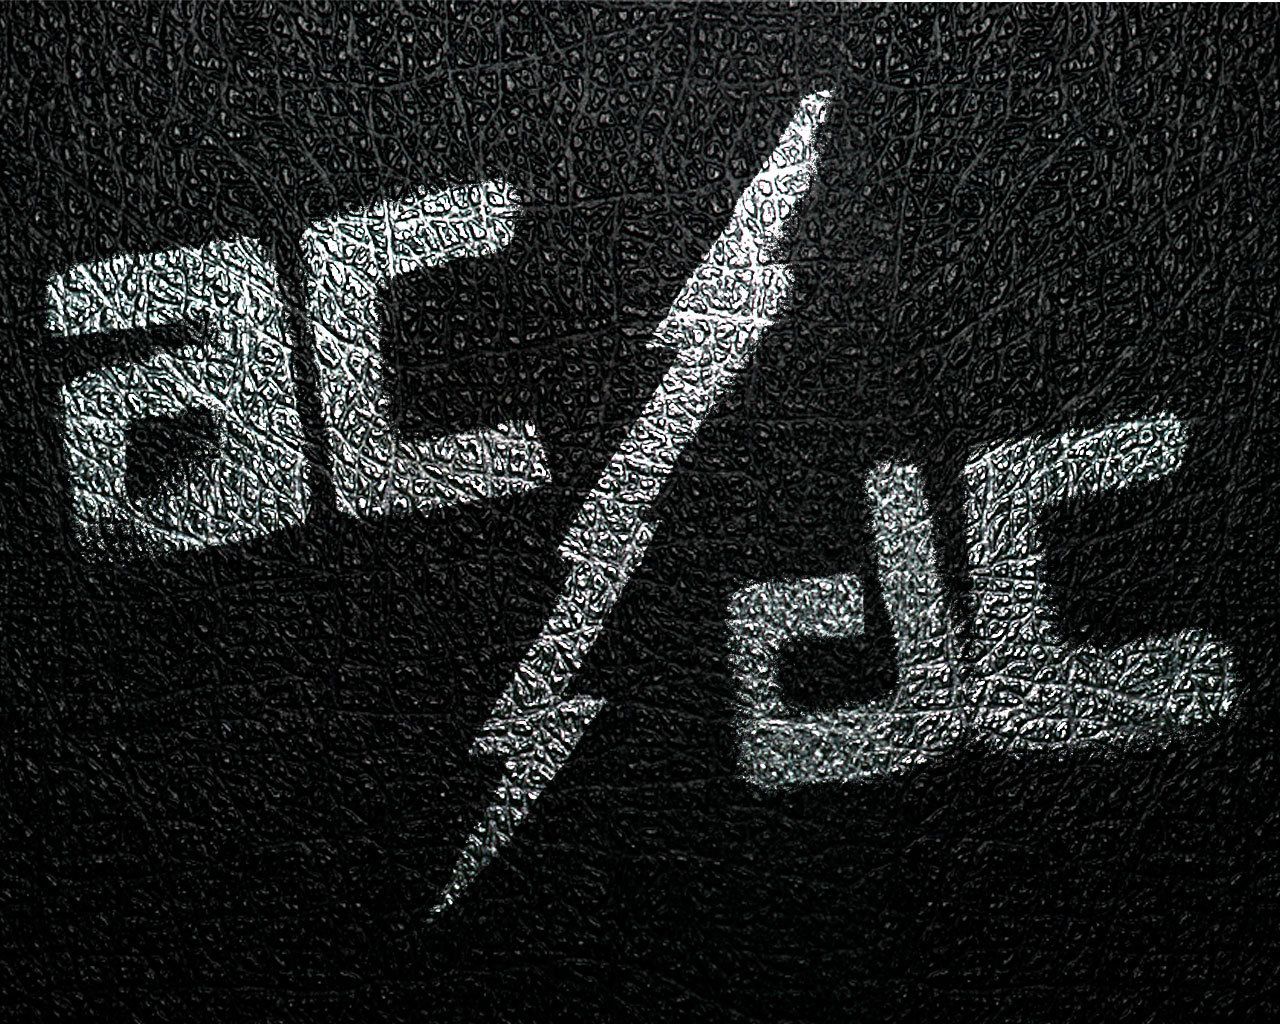 AC/DC Wallpaper - The Best AC/DC HD Wallpapers And Backgrounds For You